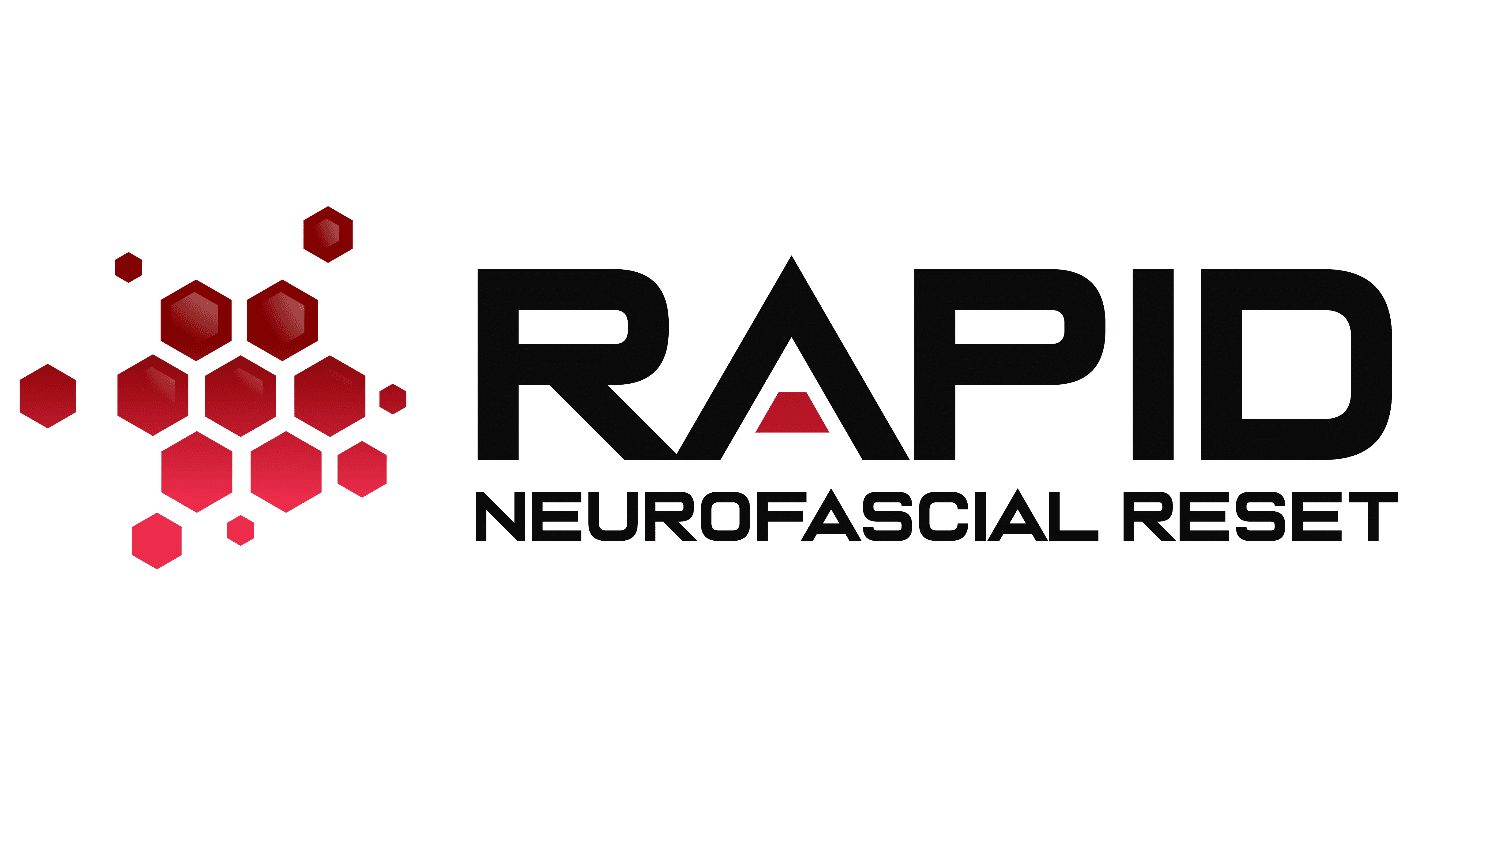 Image for RAPID NFR